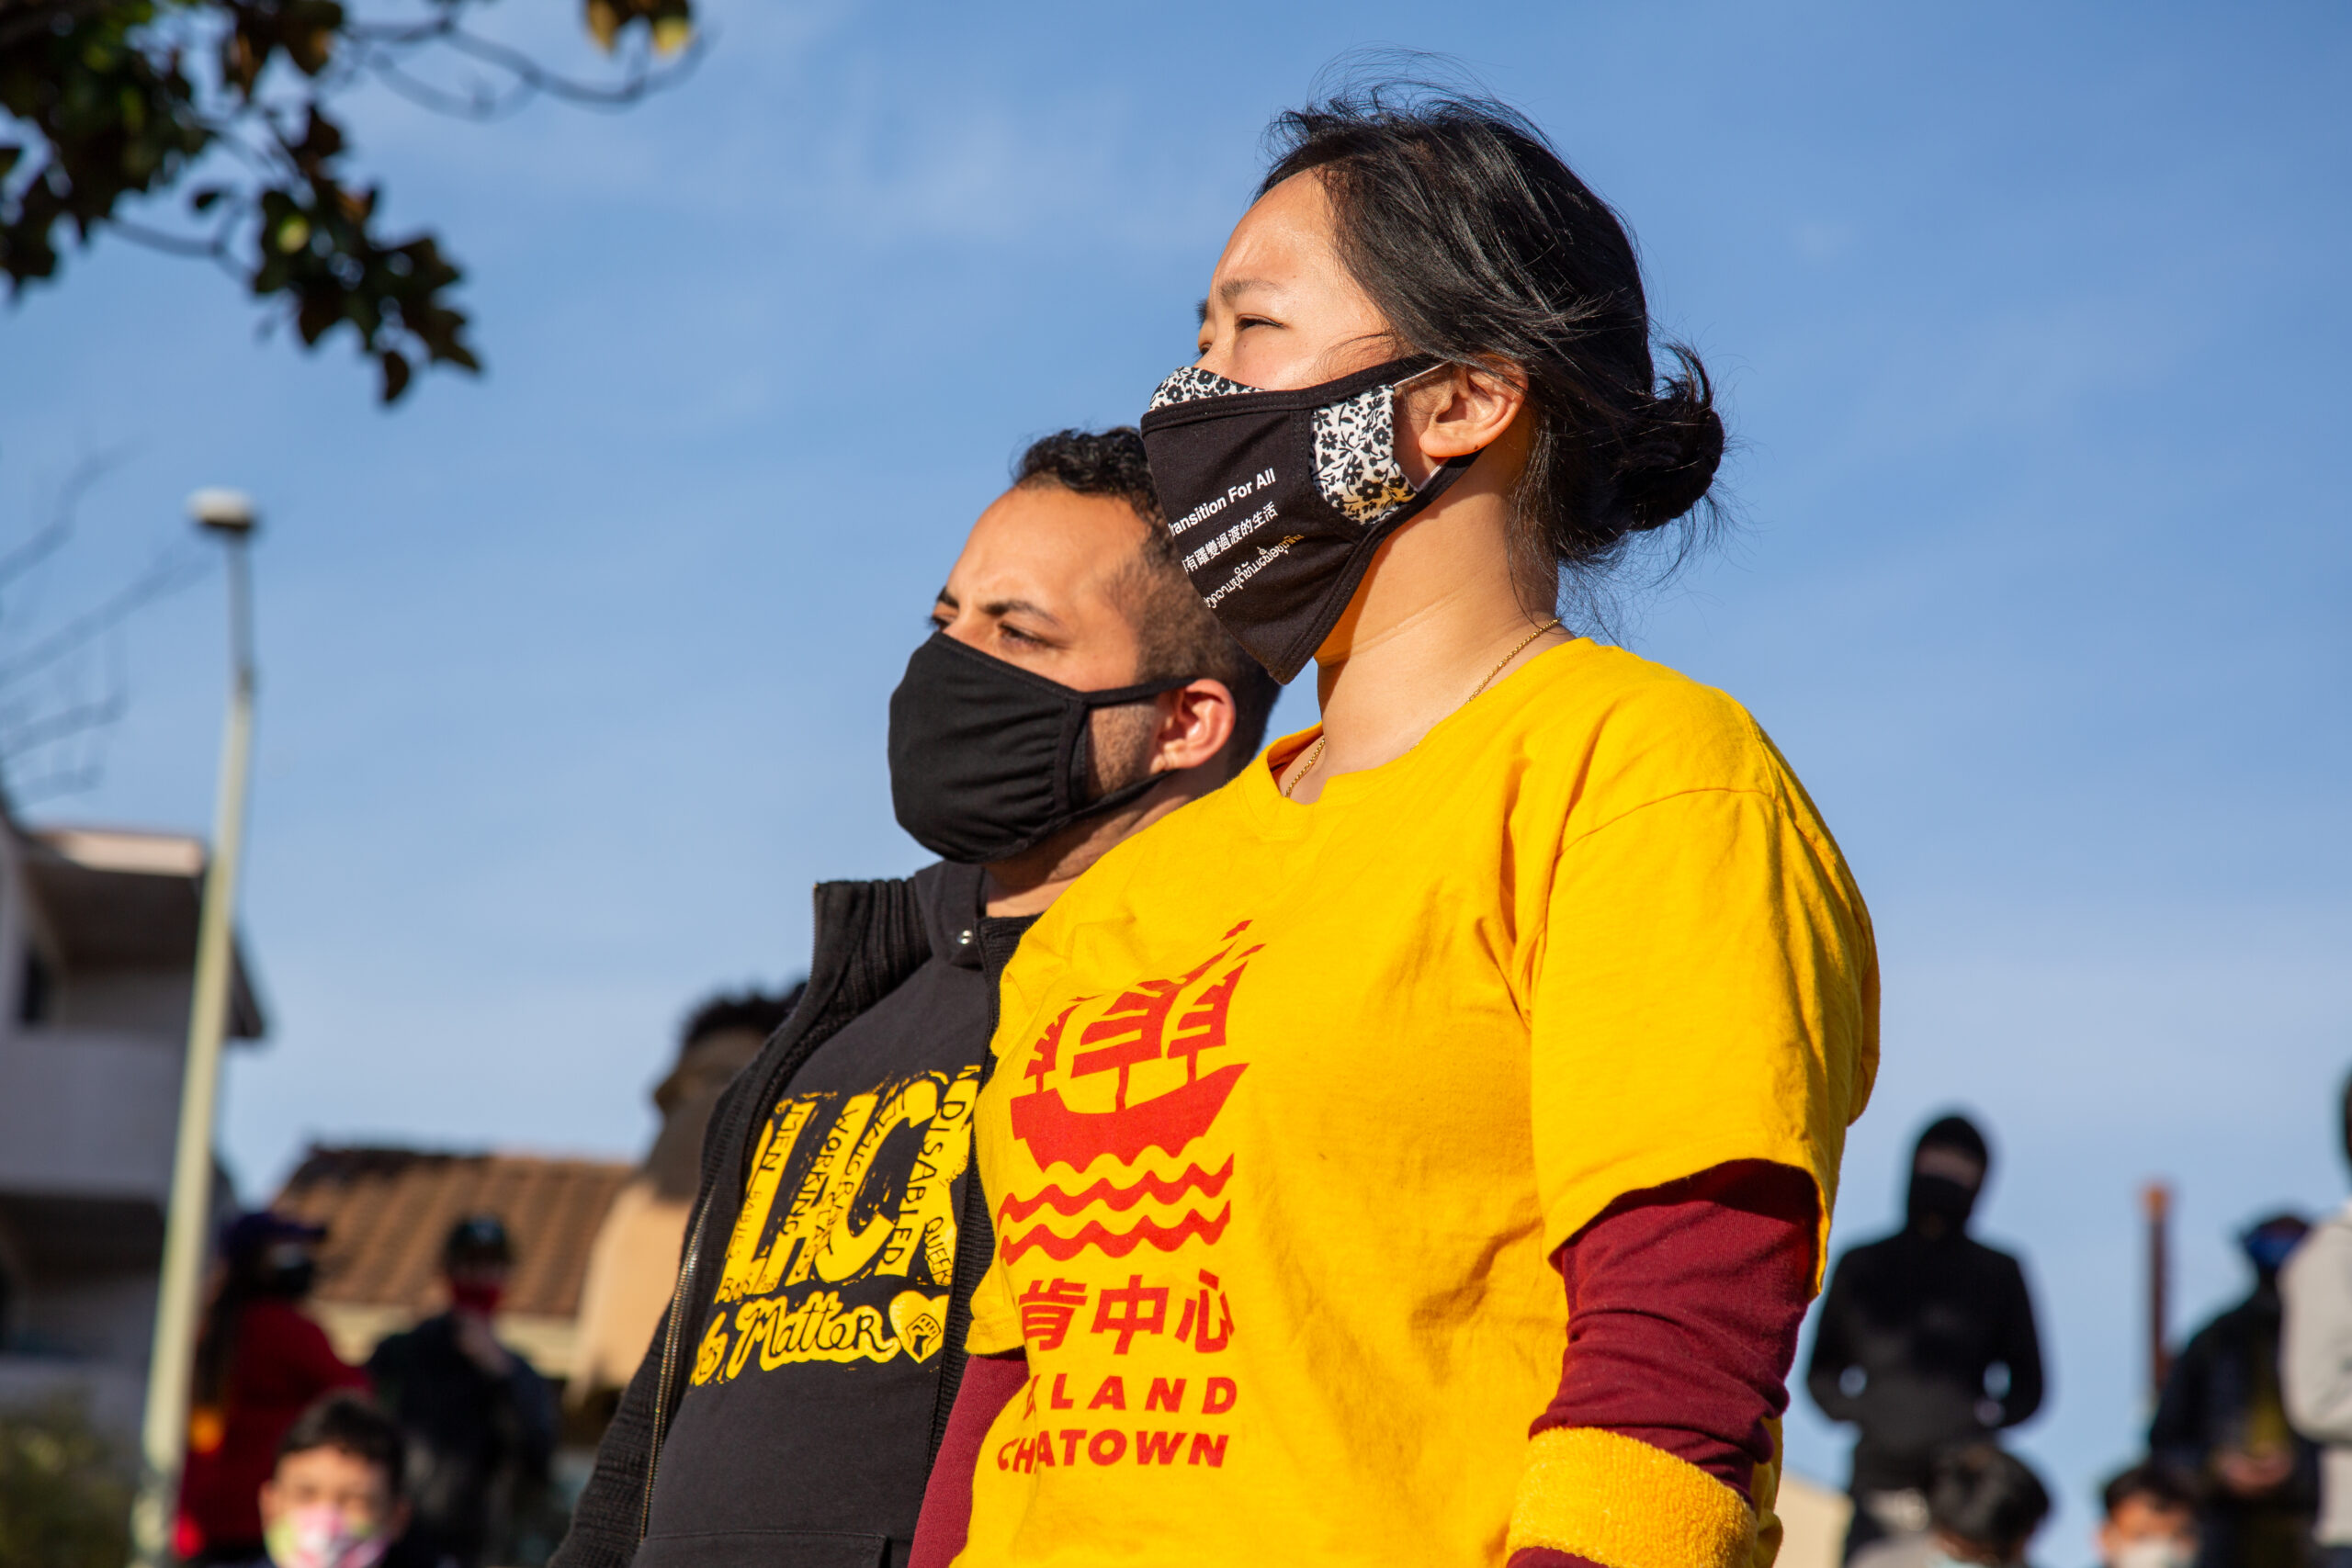 An image of 2 individuals at a Chinatown Rally in Oakland